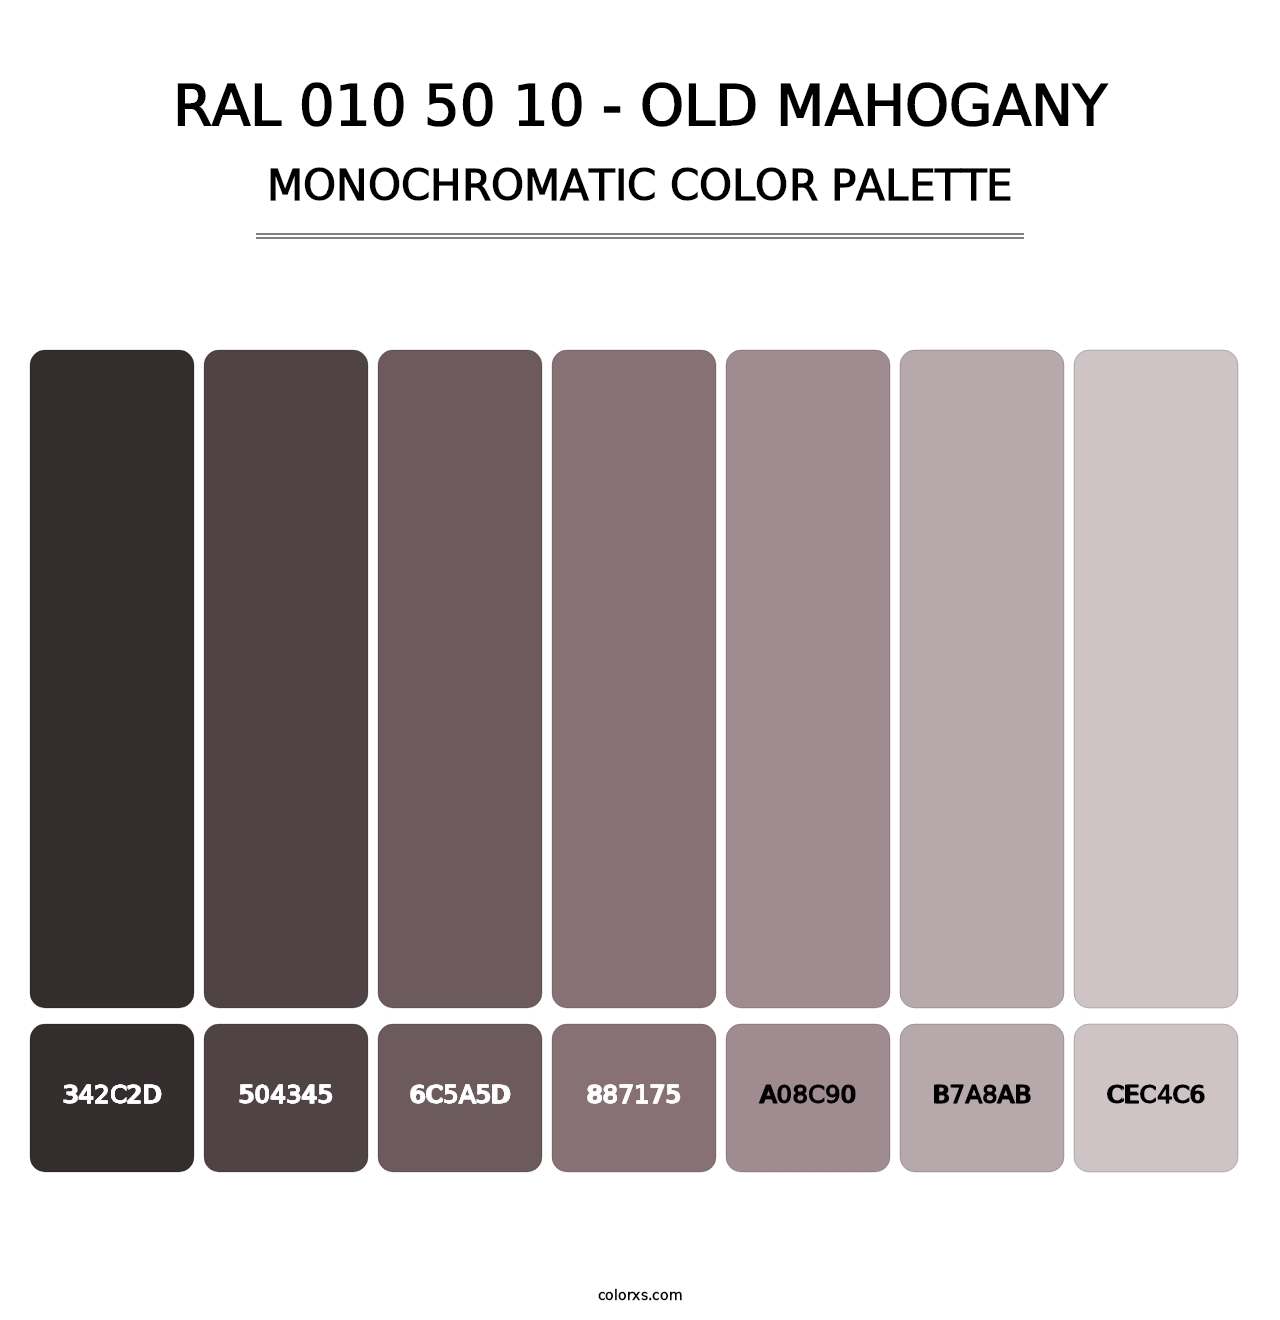 RAL 010 50 10 - Old Mahogany - Monochromatic Color Palette